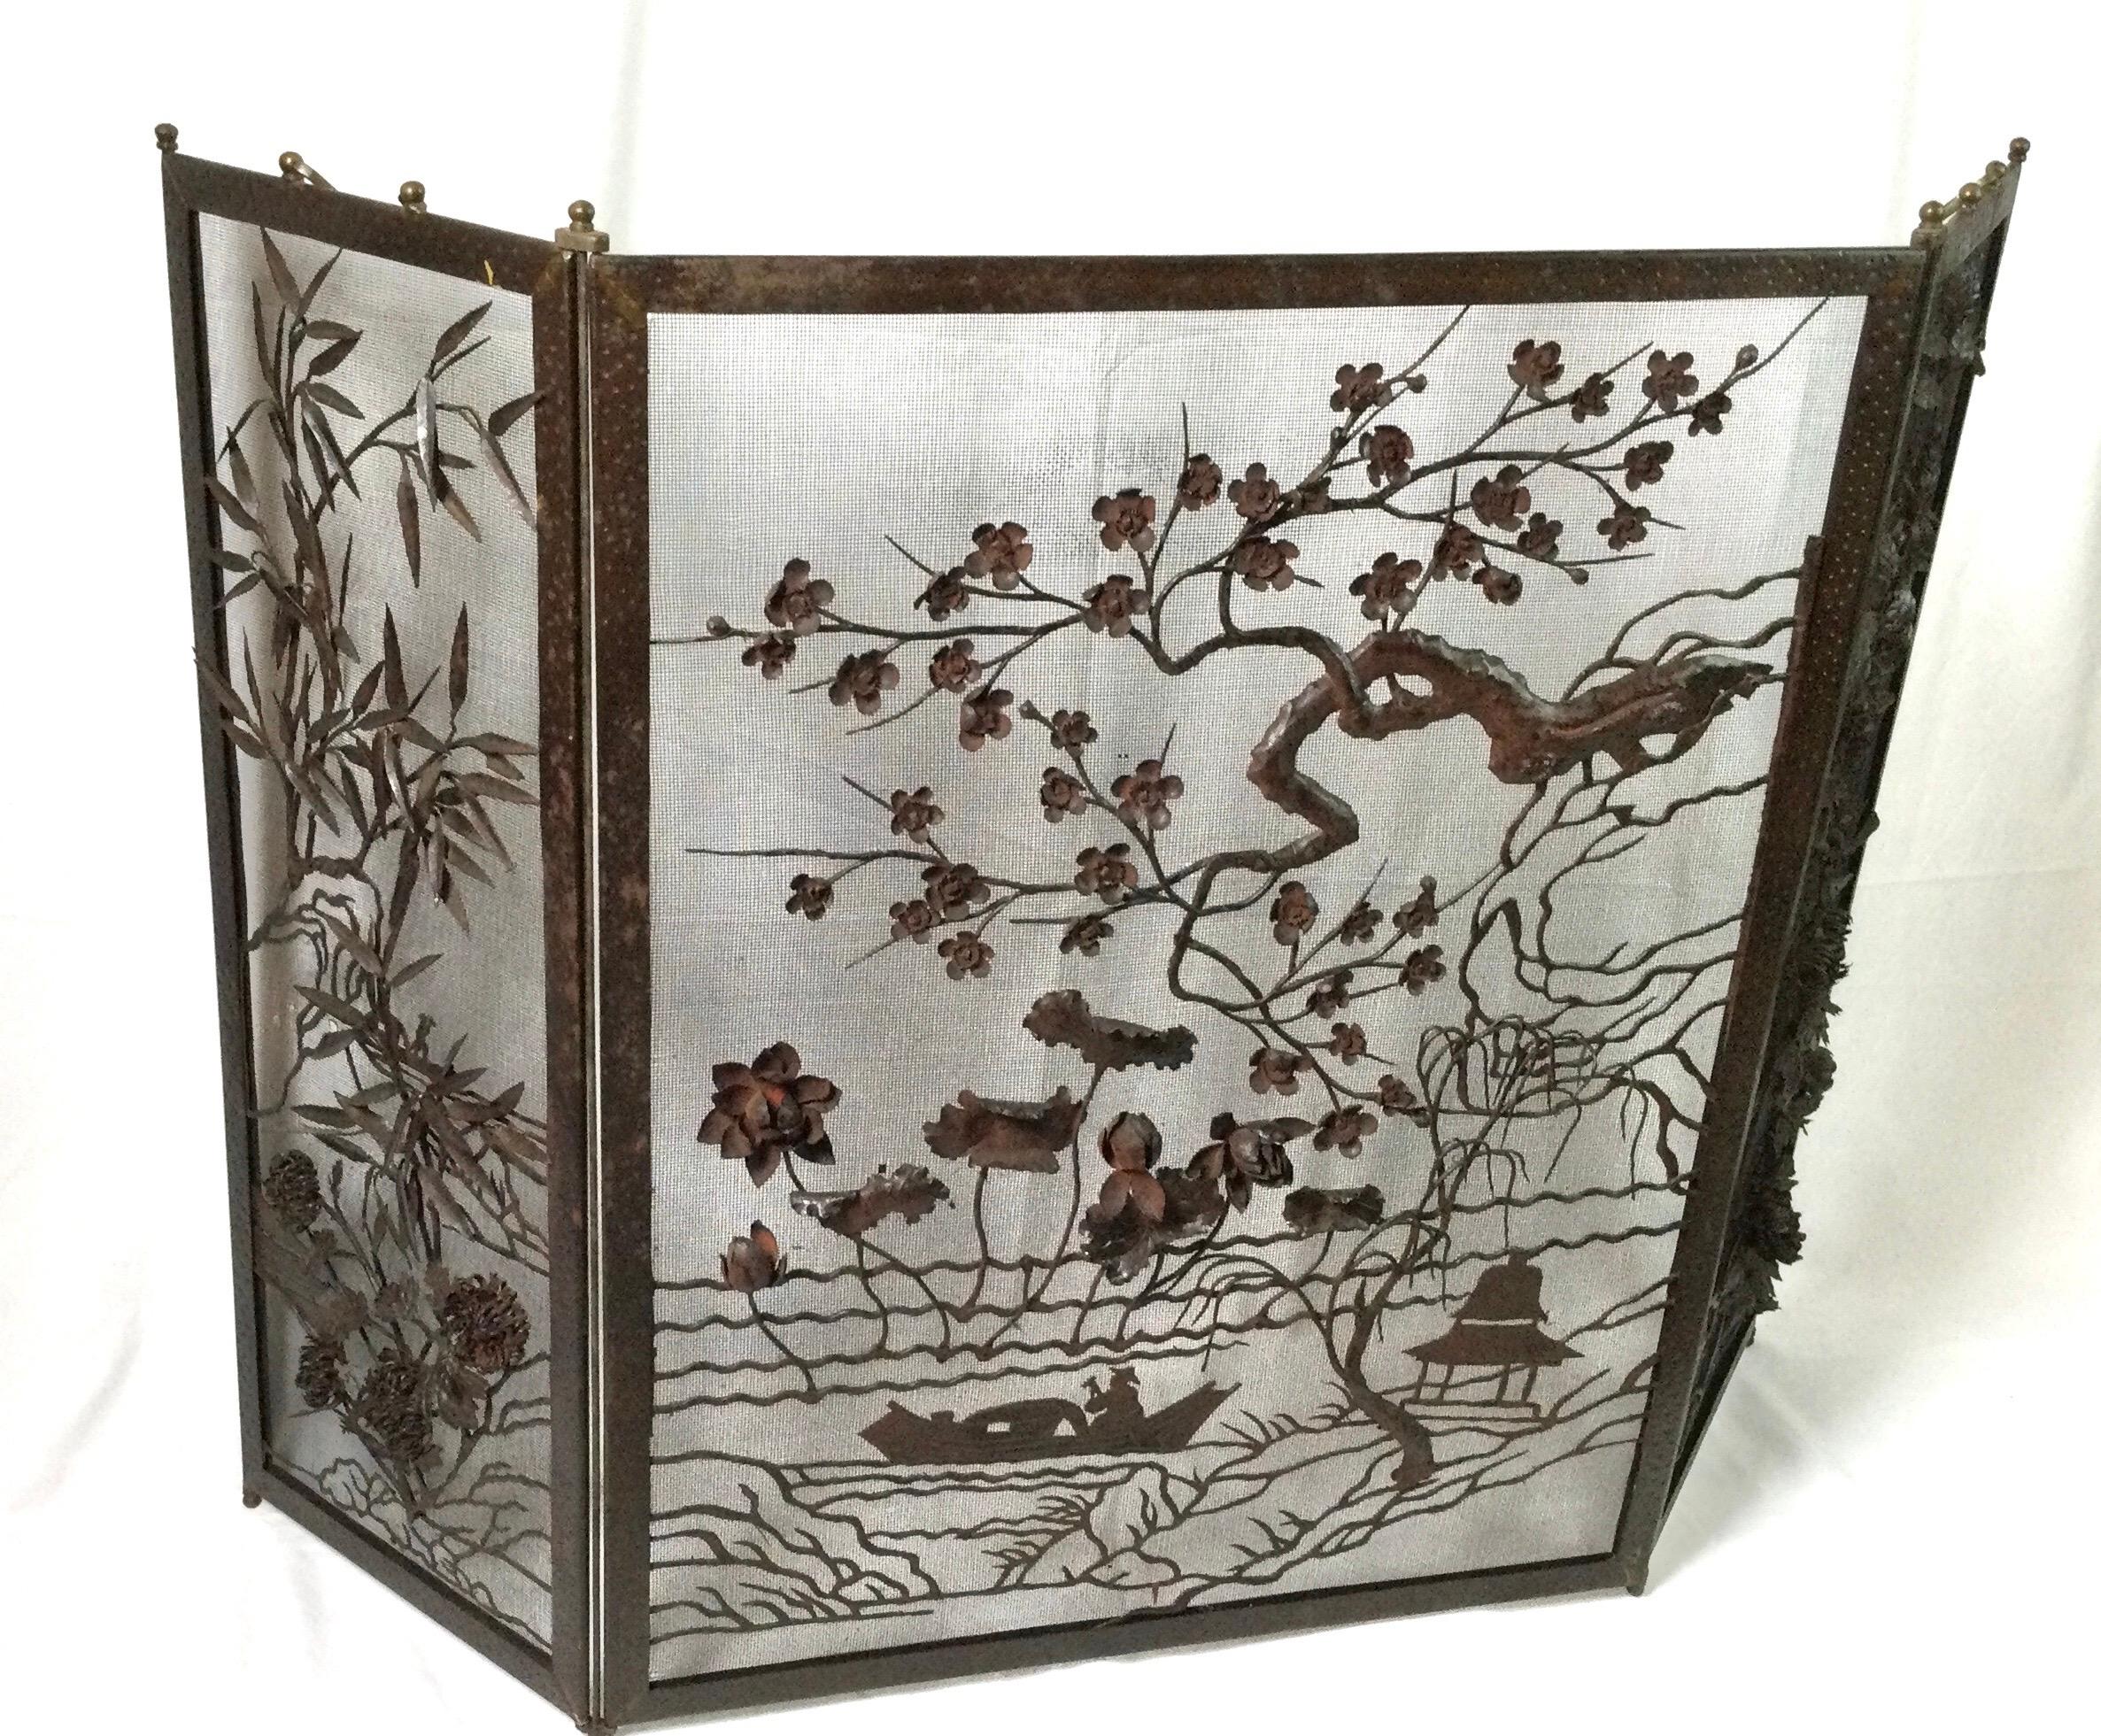 Late 19th century mixed metal fire screen with three panels. Asian motif with flowers, pagodas, bamboo shoots and exotic trees designed on all three panels. Nice high relief that will just dance with a fire behind it. Size: 54